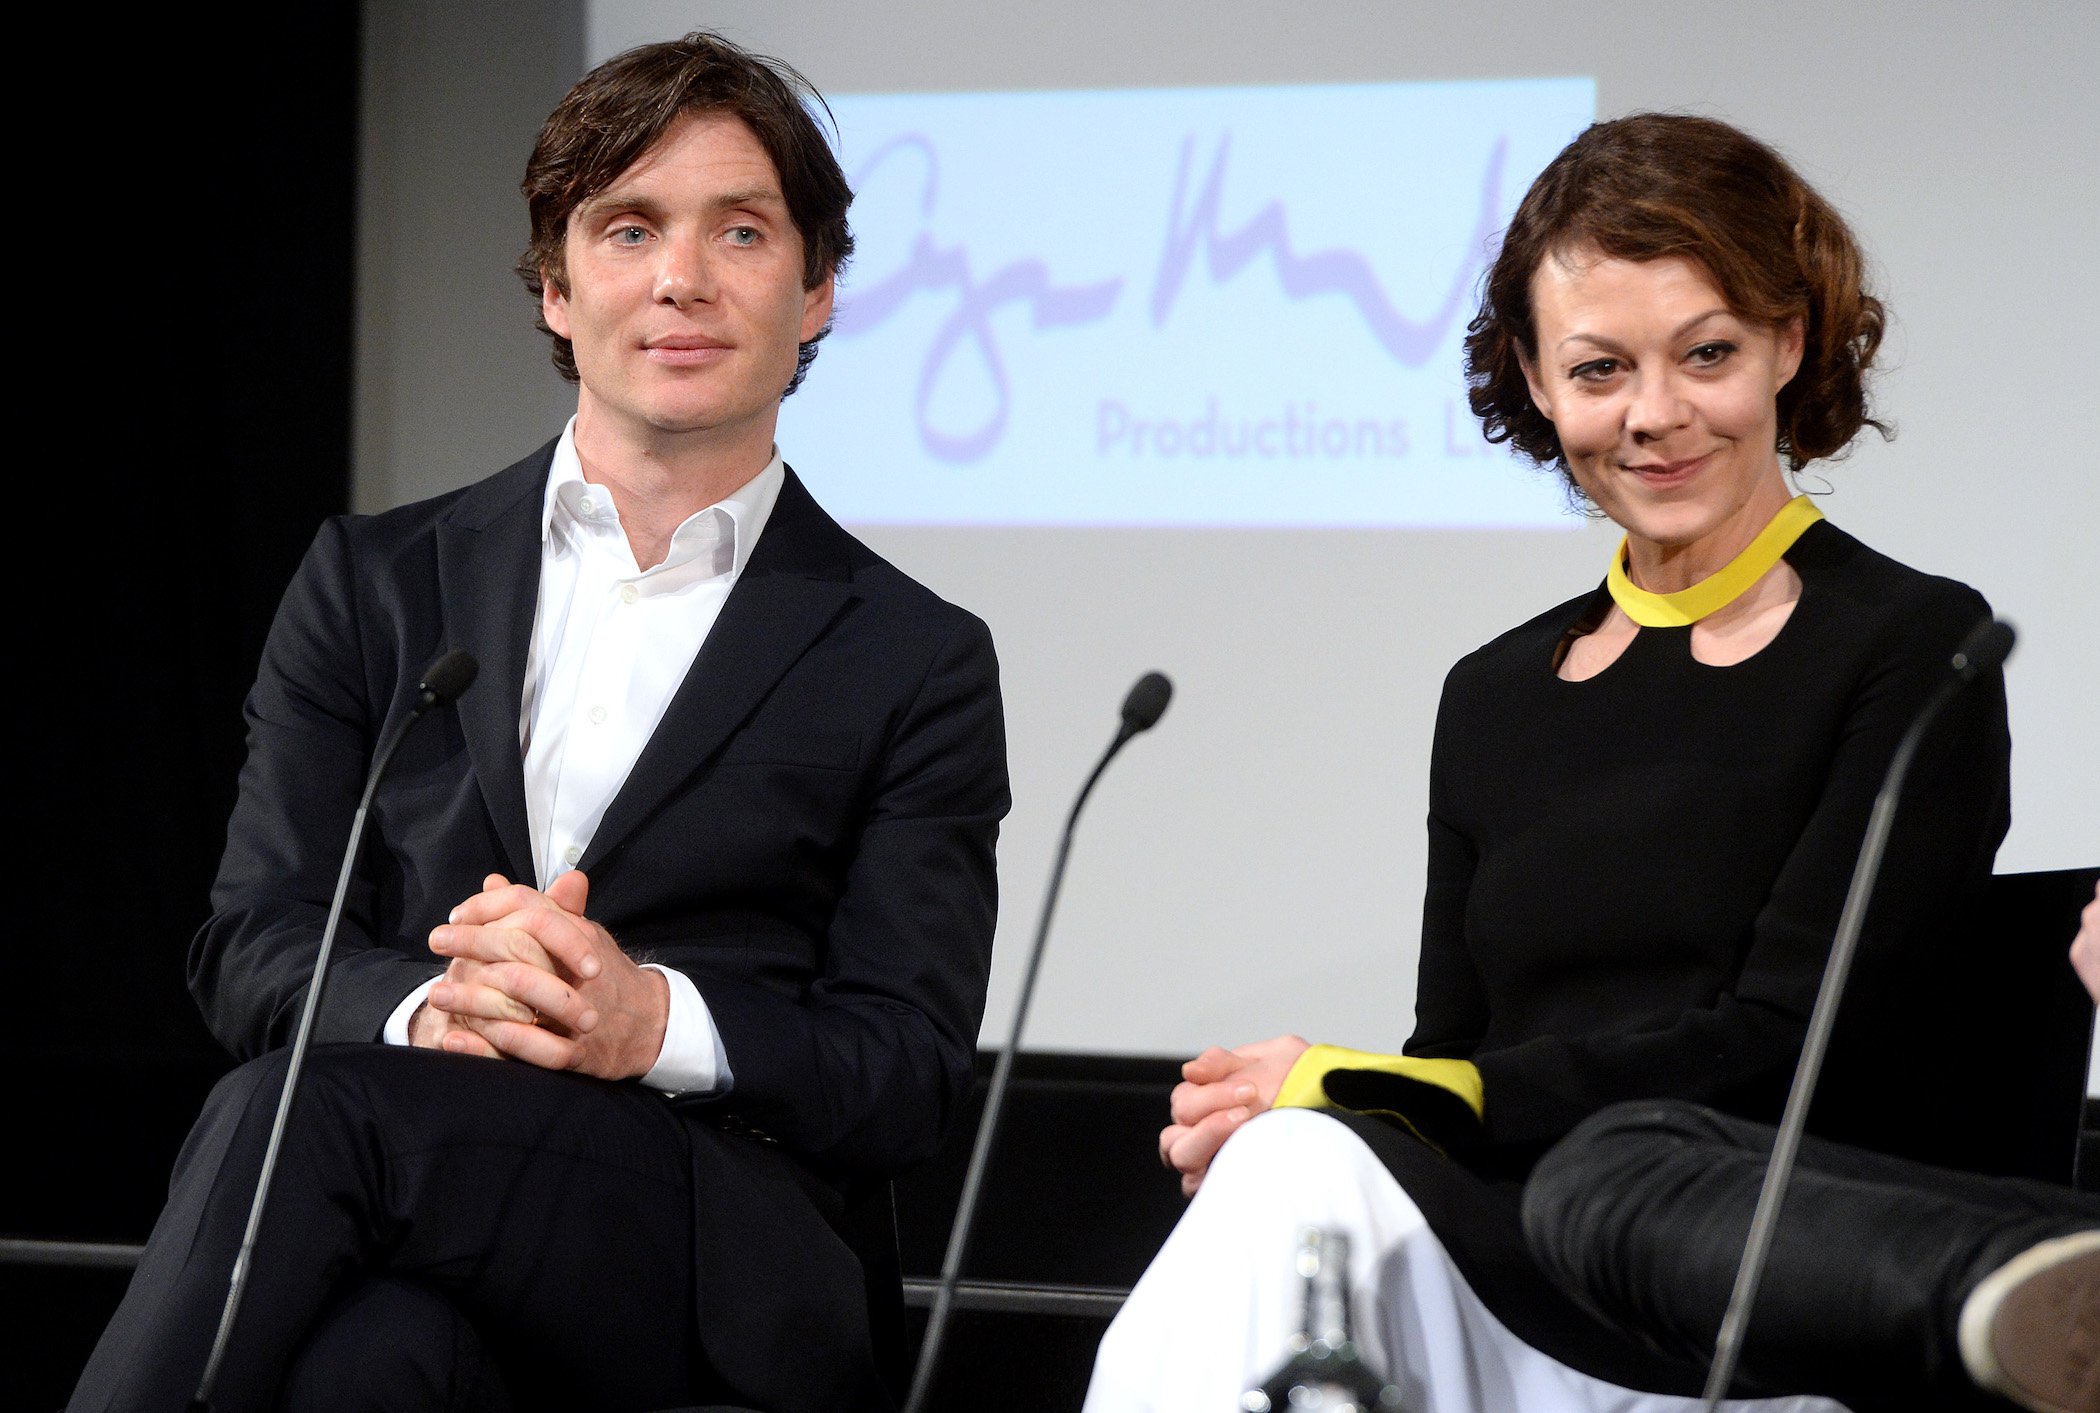 Cillian Murphy and Helen McCrory, Thomas Shelby and Polly Gray from 'Peaky Blinders' Season 6, sitting next to each other at an event